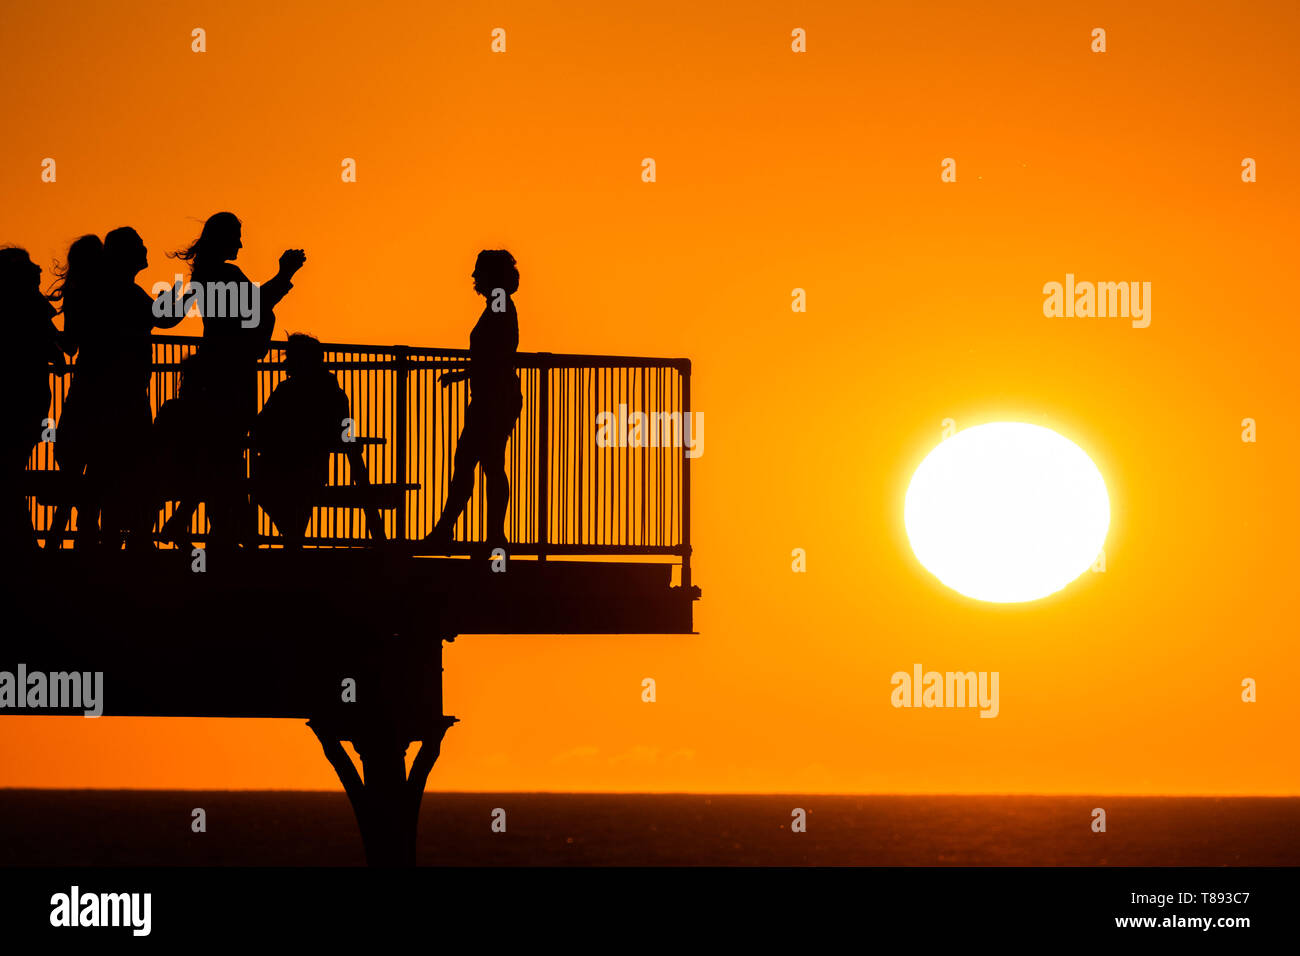 Aberystwyth Wales UK, Saturday 11 May 2019  UK Weather: People are silhouetted  against the glorious setting sun as they stand on the pier in Aberystwyth on the Cardigan Bay coast, West Wales. The weather is set to get warmer again in the coming week after as period of unsettled cold conditions.   photo credit Keith Morris / Alamy Live News Stock Photo